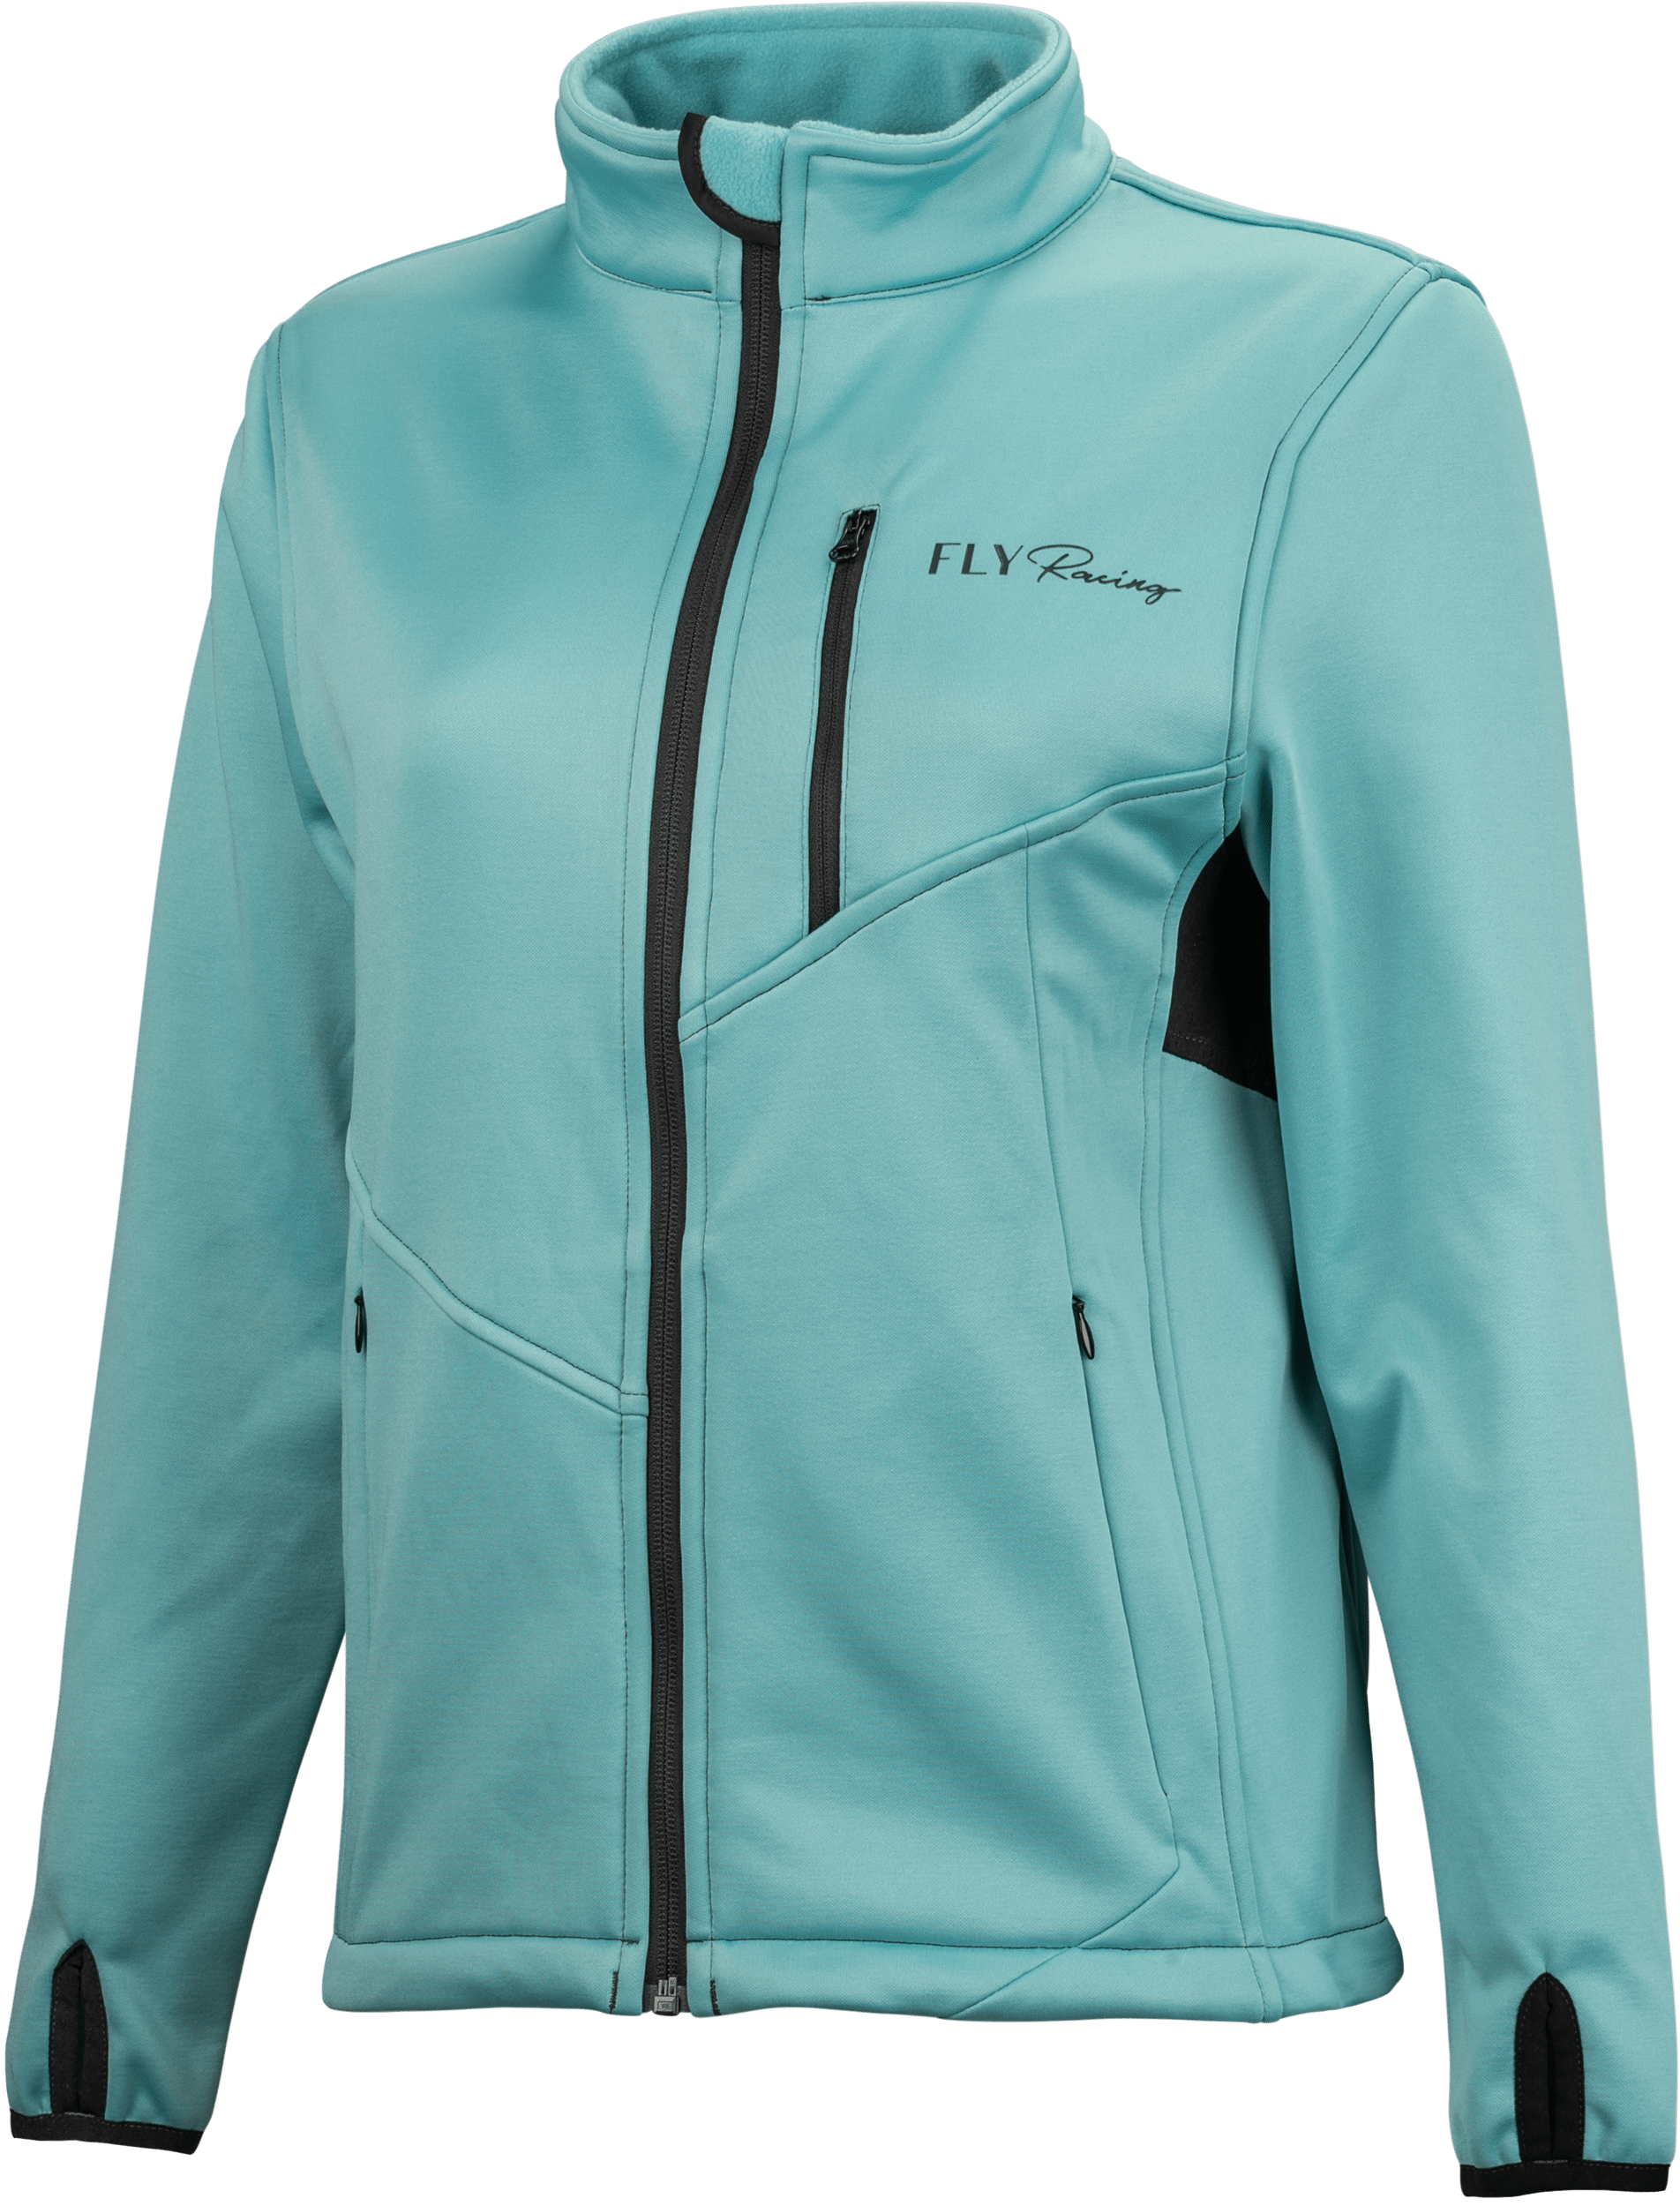 Western Powersports Jacket Blue / 2X Women's Mid Layer Jacket By Fly Racing 354-63412X